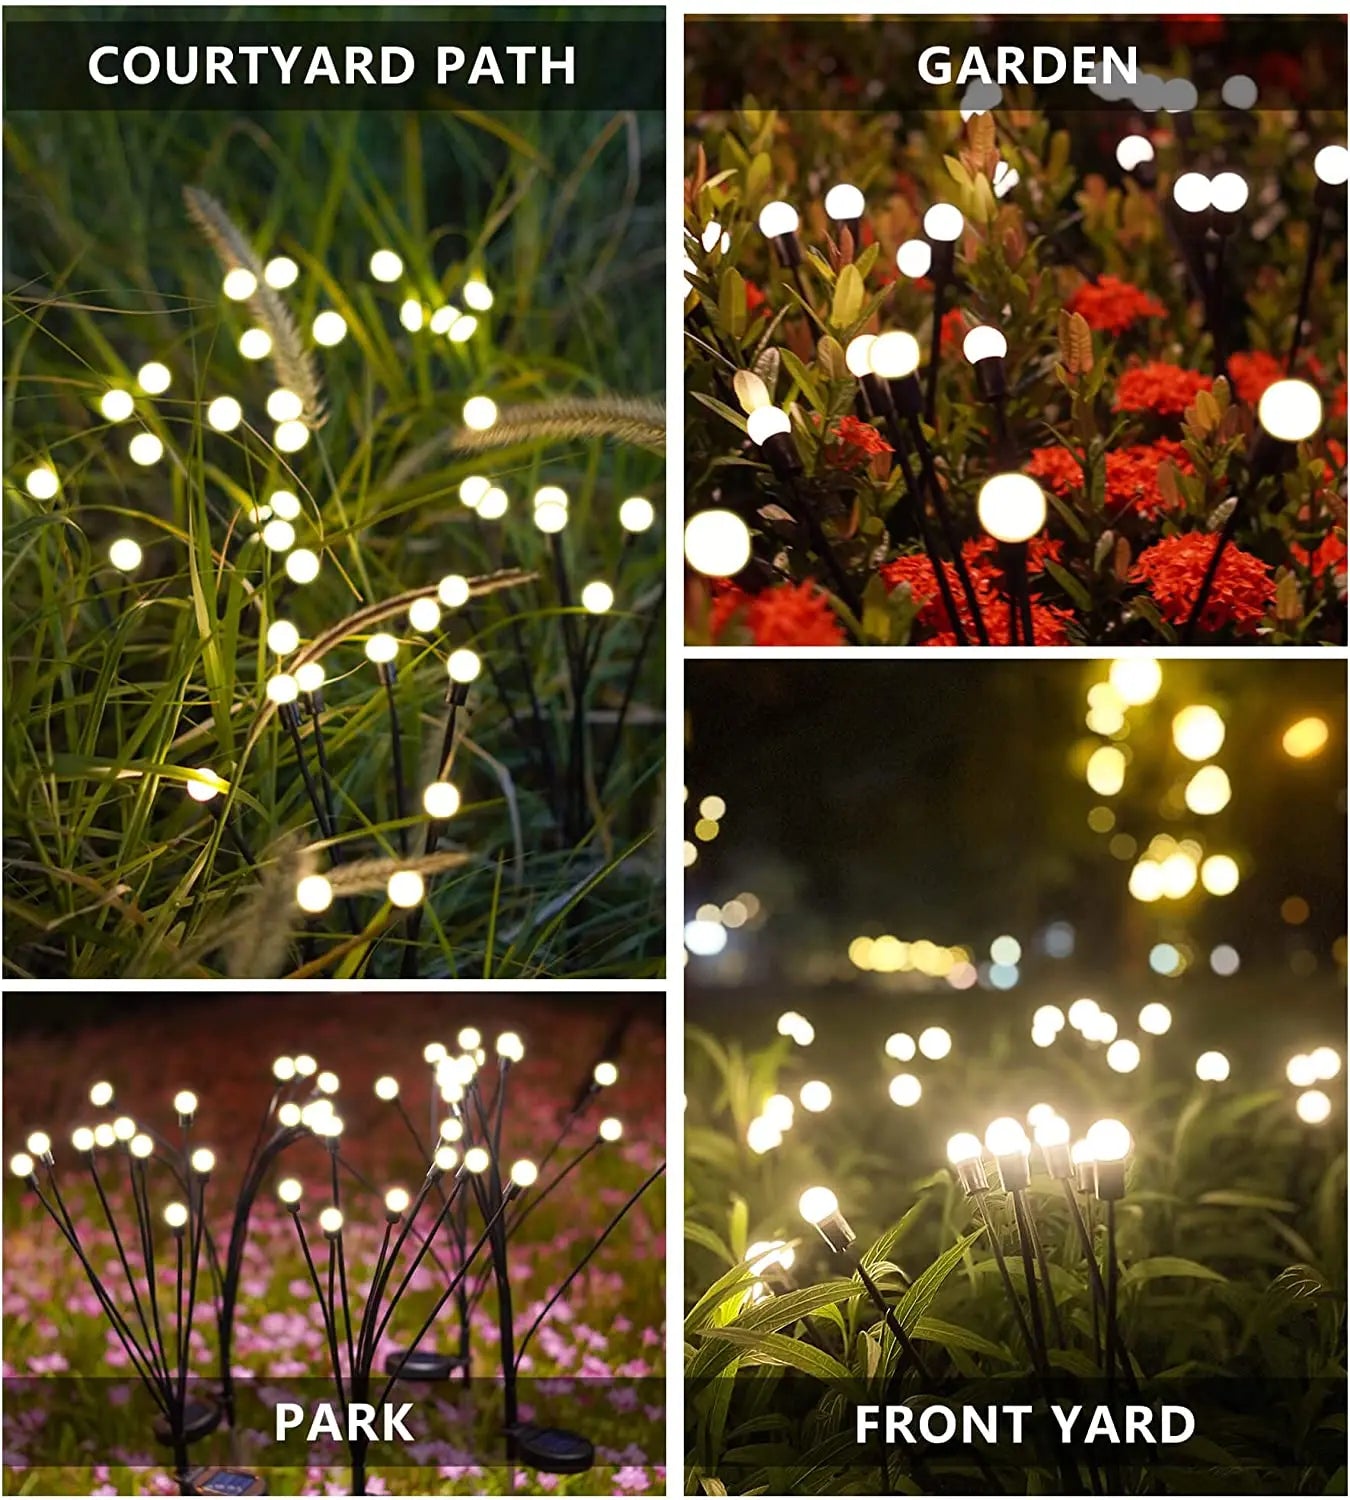 8Pack Solar Firefly Light, Solar-powered lights add ambiance to outdoor spaces like courtyards, paths, and gardens.